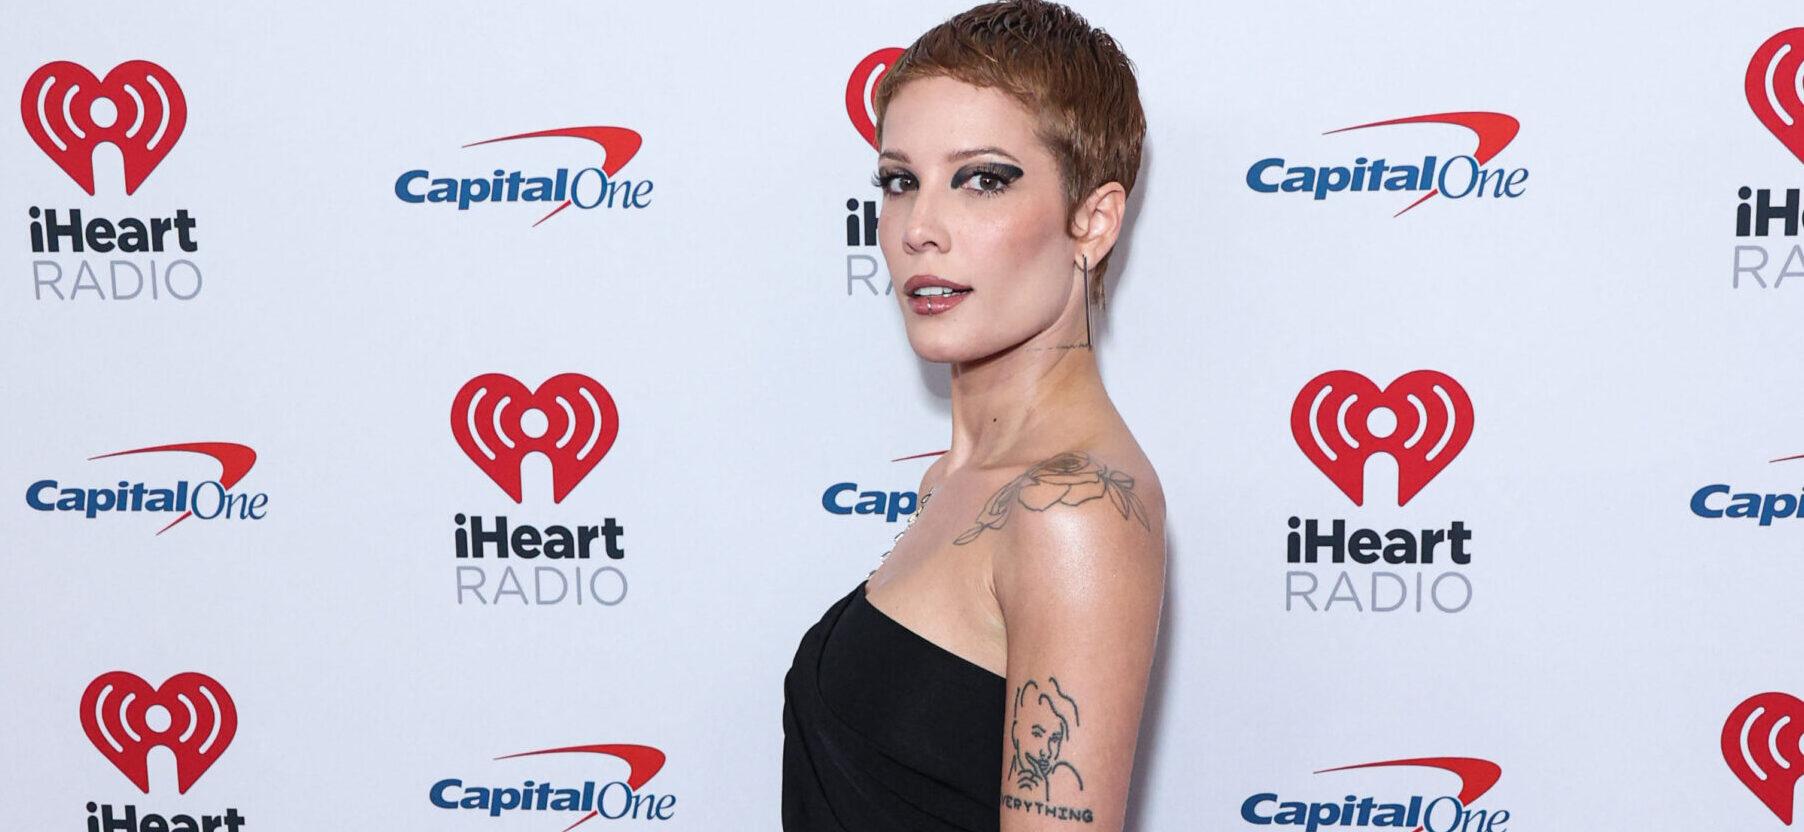 Fans Lose It As Halsey Teases 5th Studio Album With Cryptic Photo Dump